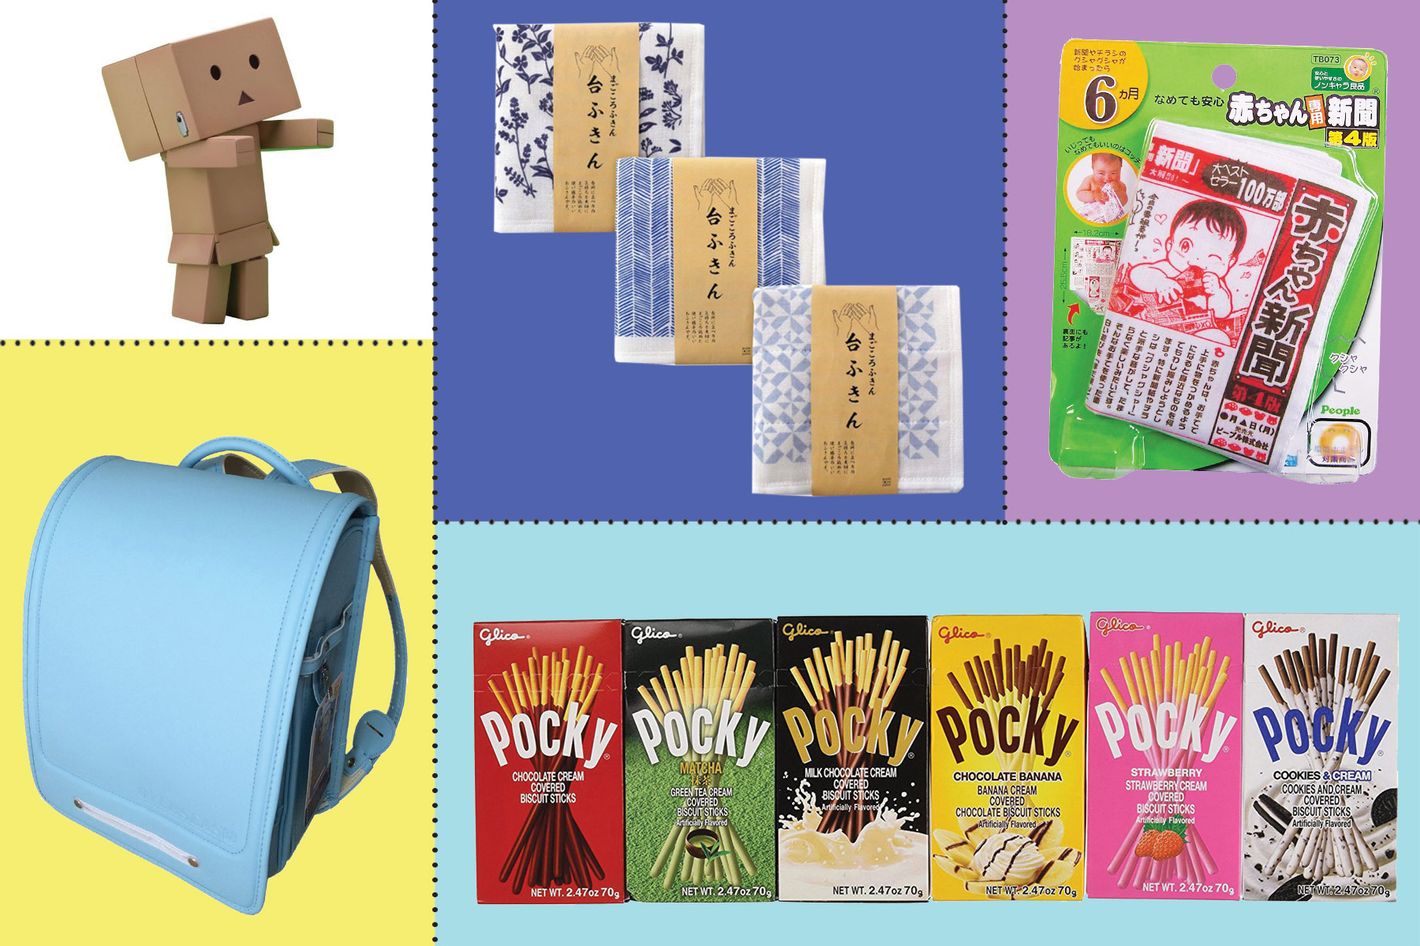 Japanese Gadgets, Fashion, Beauty, Snacks and more